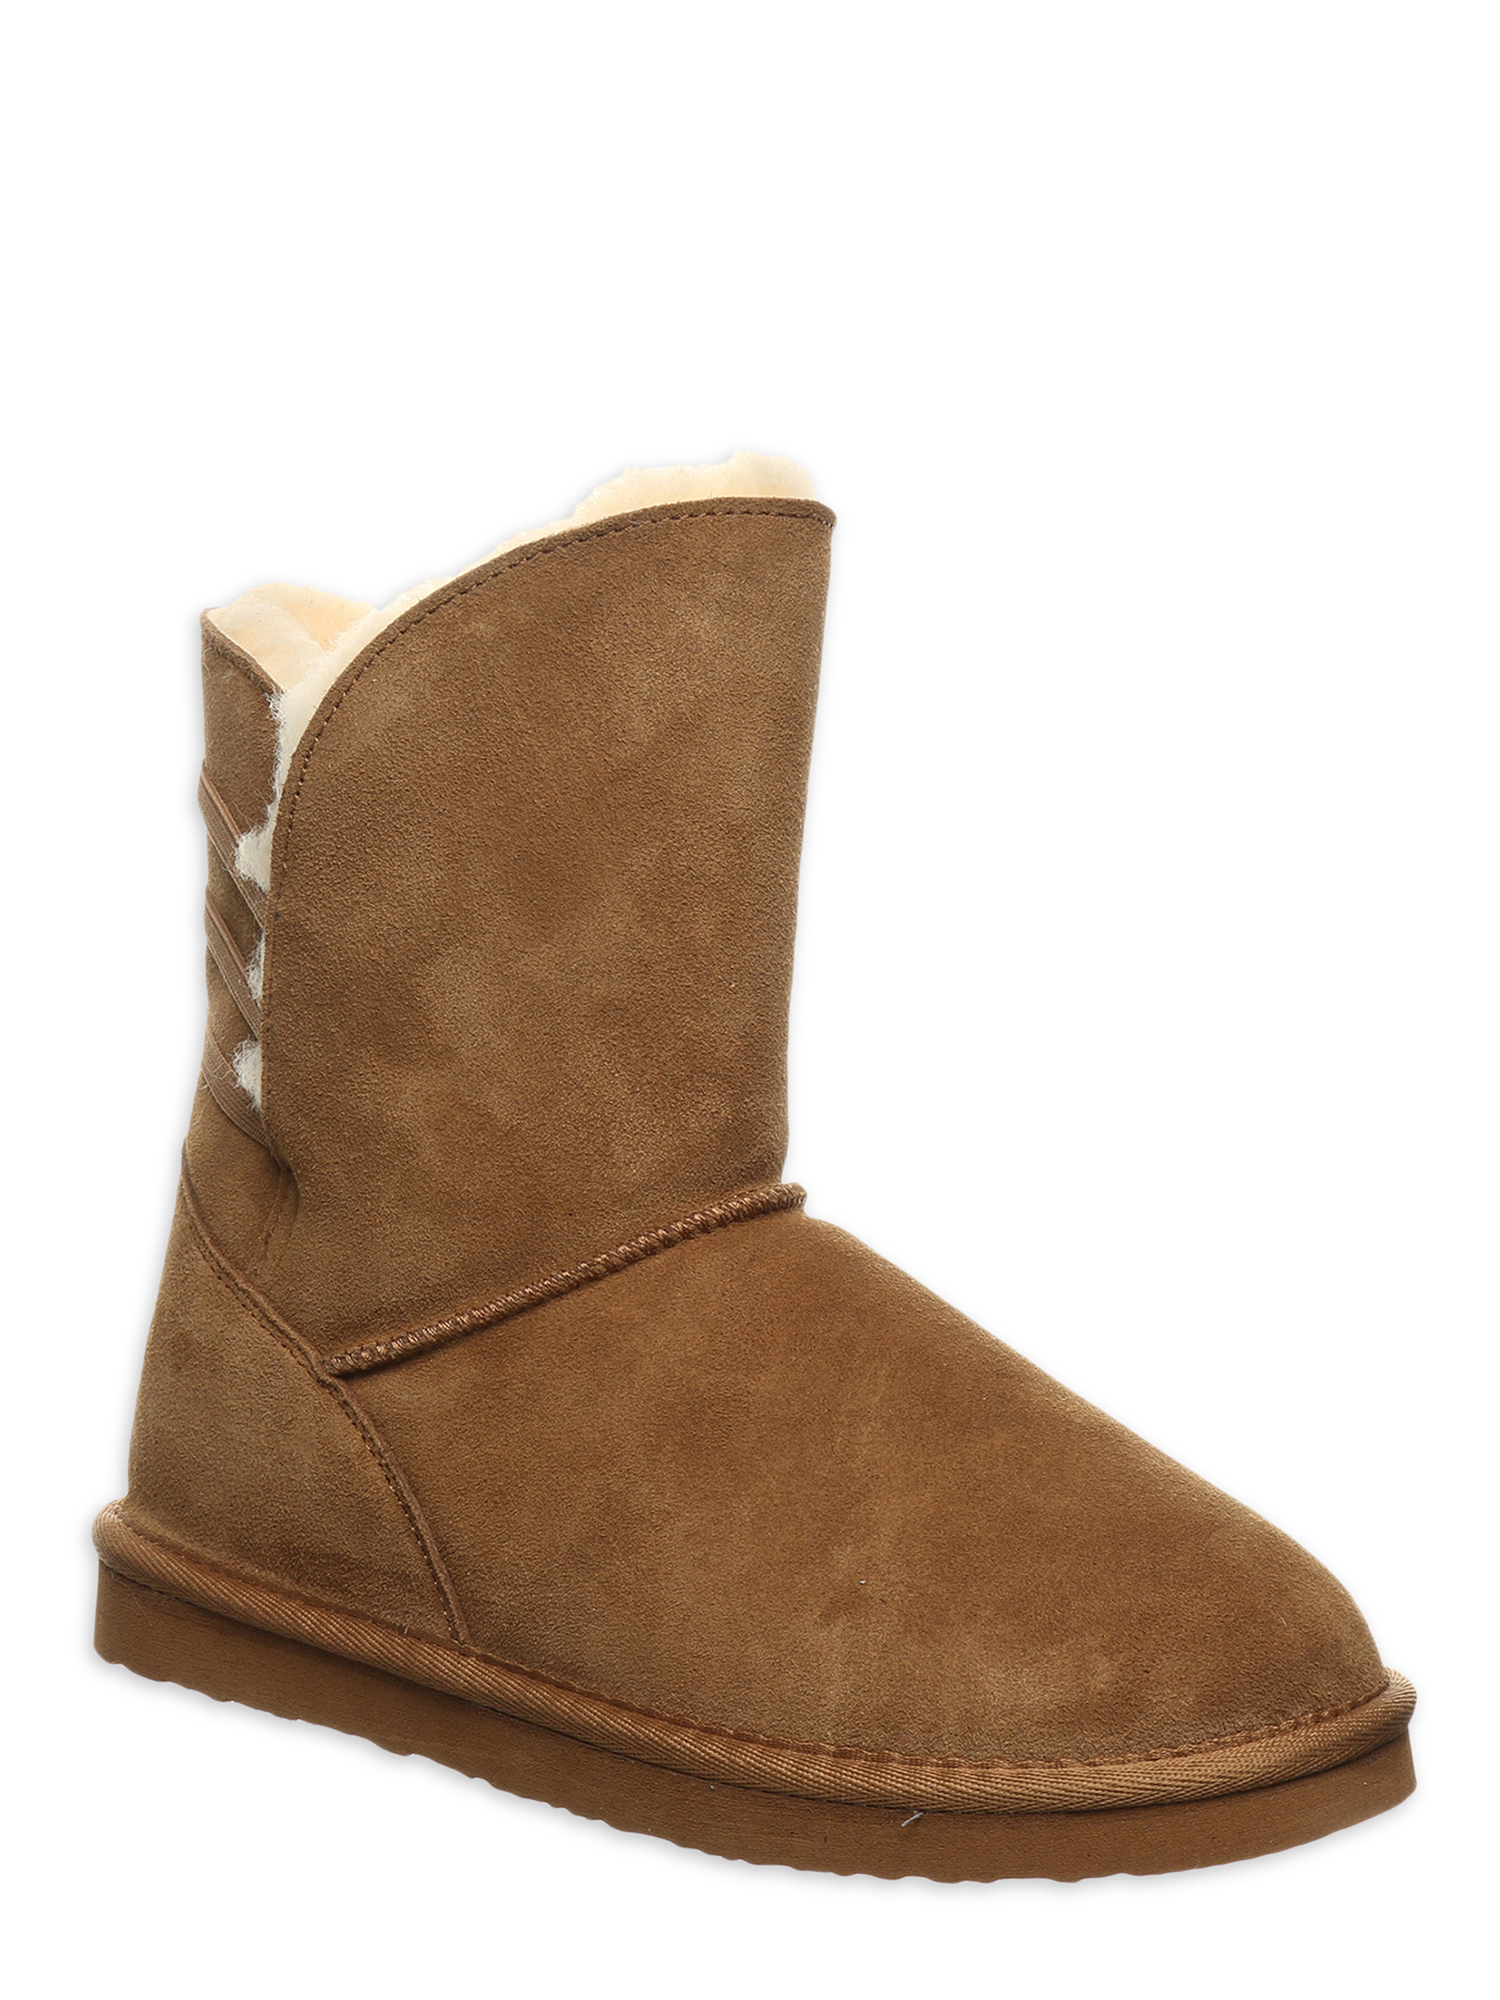 Pawz by Bearpaw Womens Everleigh Faux Fur Lined Suede Boot - image 1 of 5